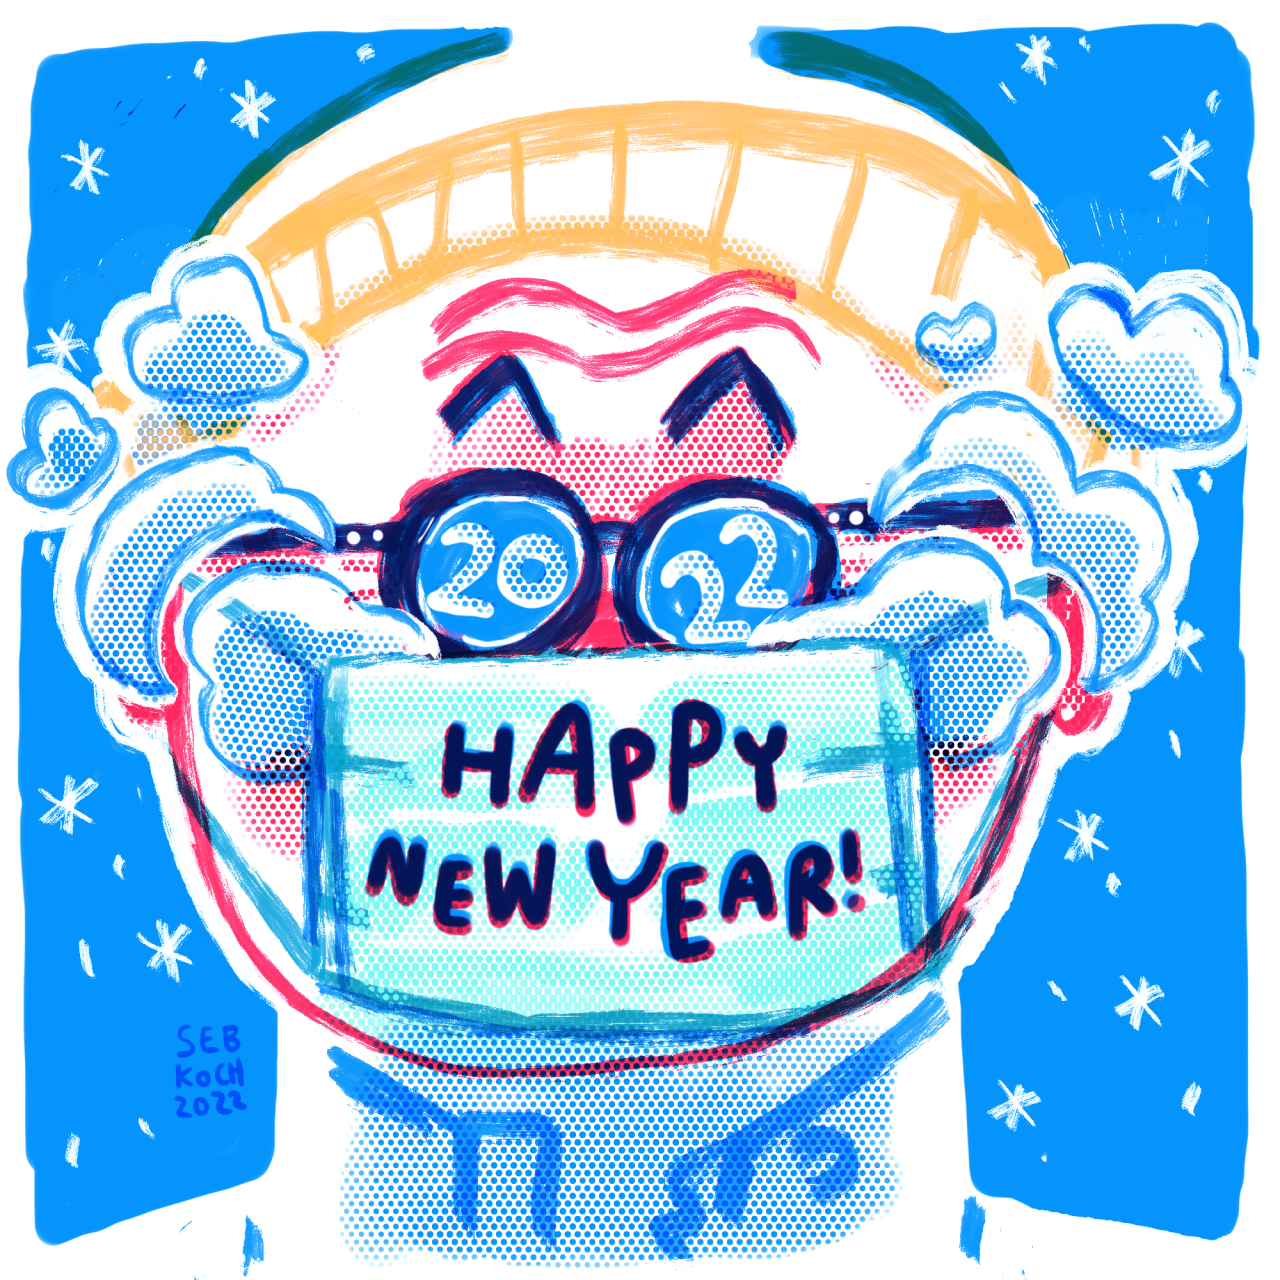 A happy new year, everyone! All the best, may many of your wishes come true (swype for bonus drawing) #2022 #happynewyear https://www.instagram.com/p/CYR5N8yLEsk/?utm_medium=tumblr